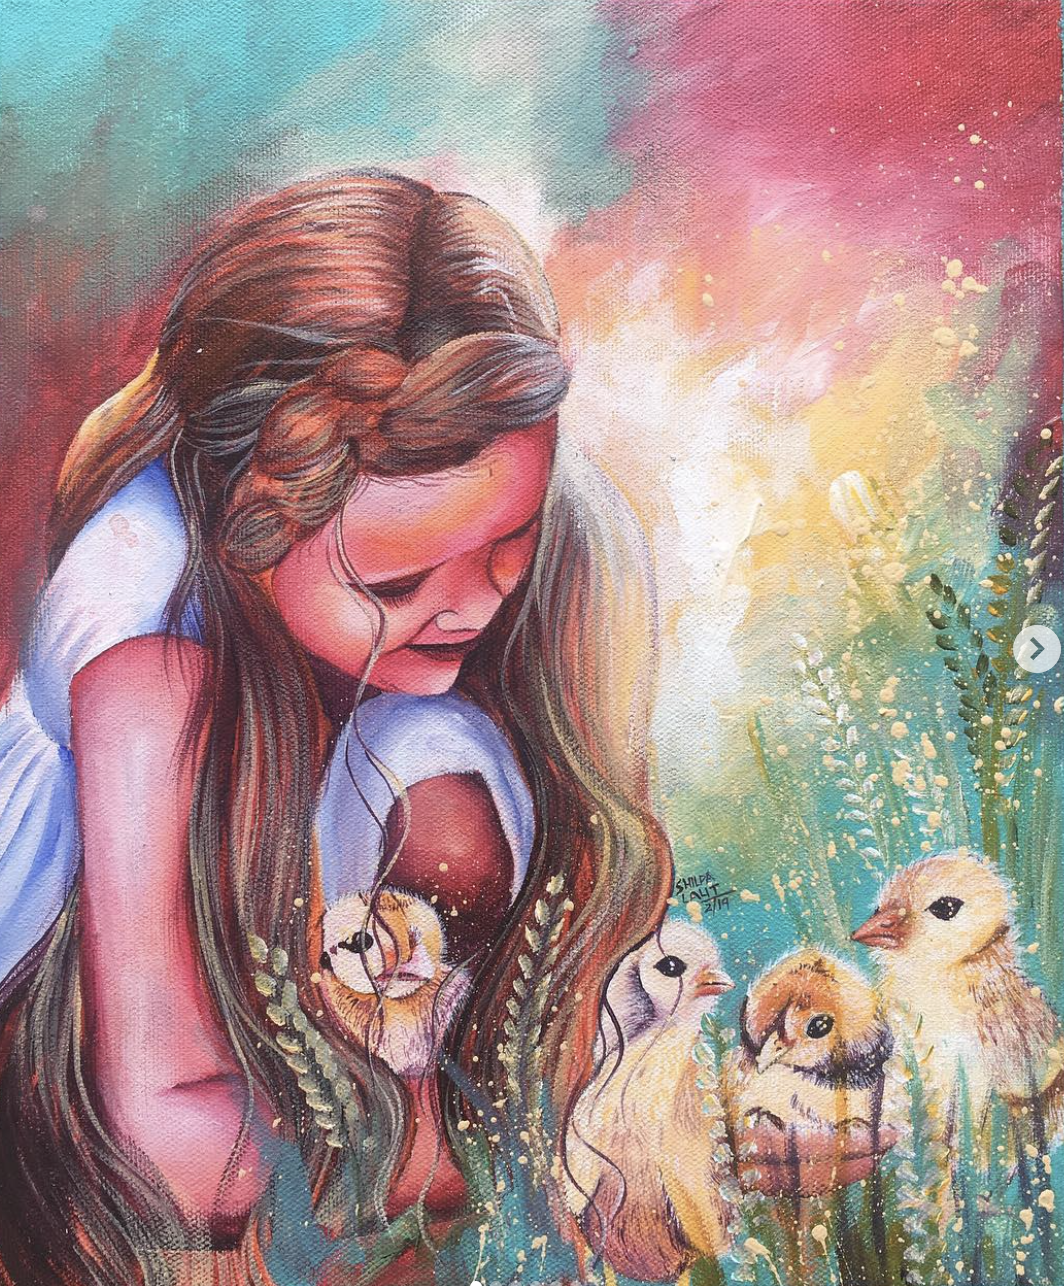 ACRYLIC PAINTING WORKSHOP : Learn the Step-by-Step Process of Painting a Adorable Little Girl Playing with Baby Chicks in Acrylics